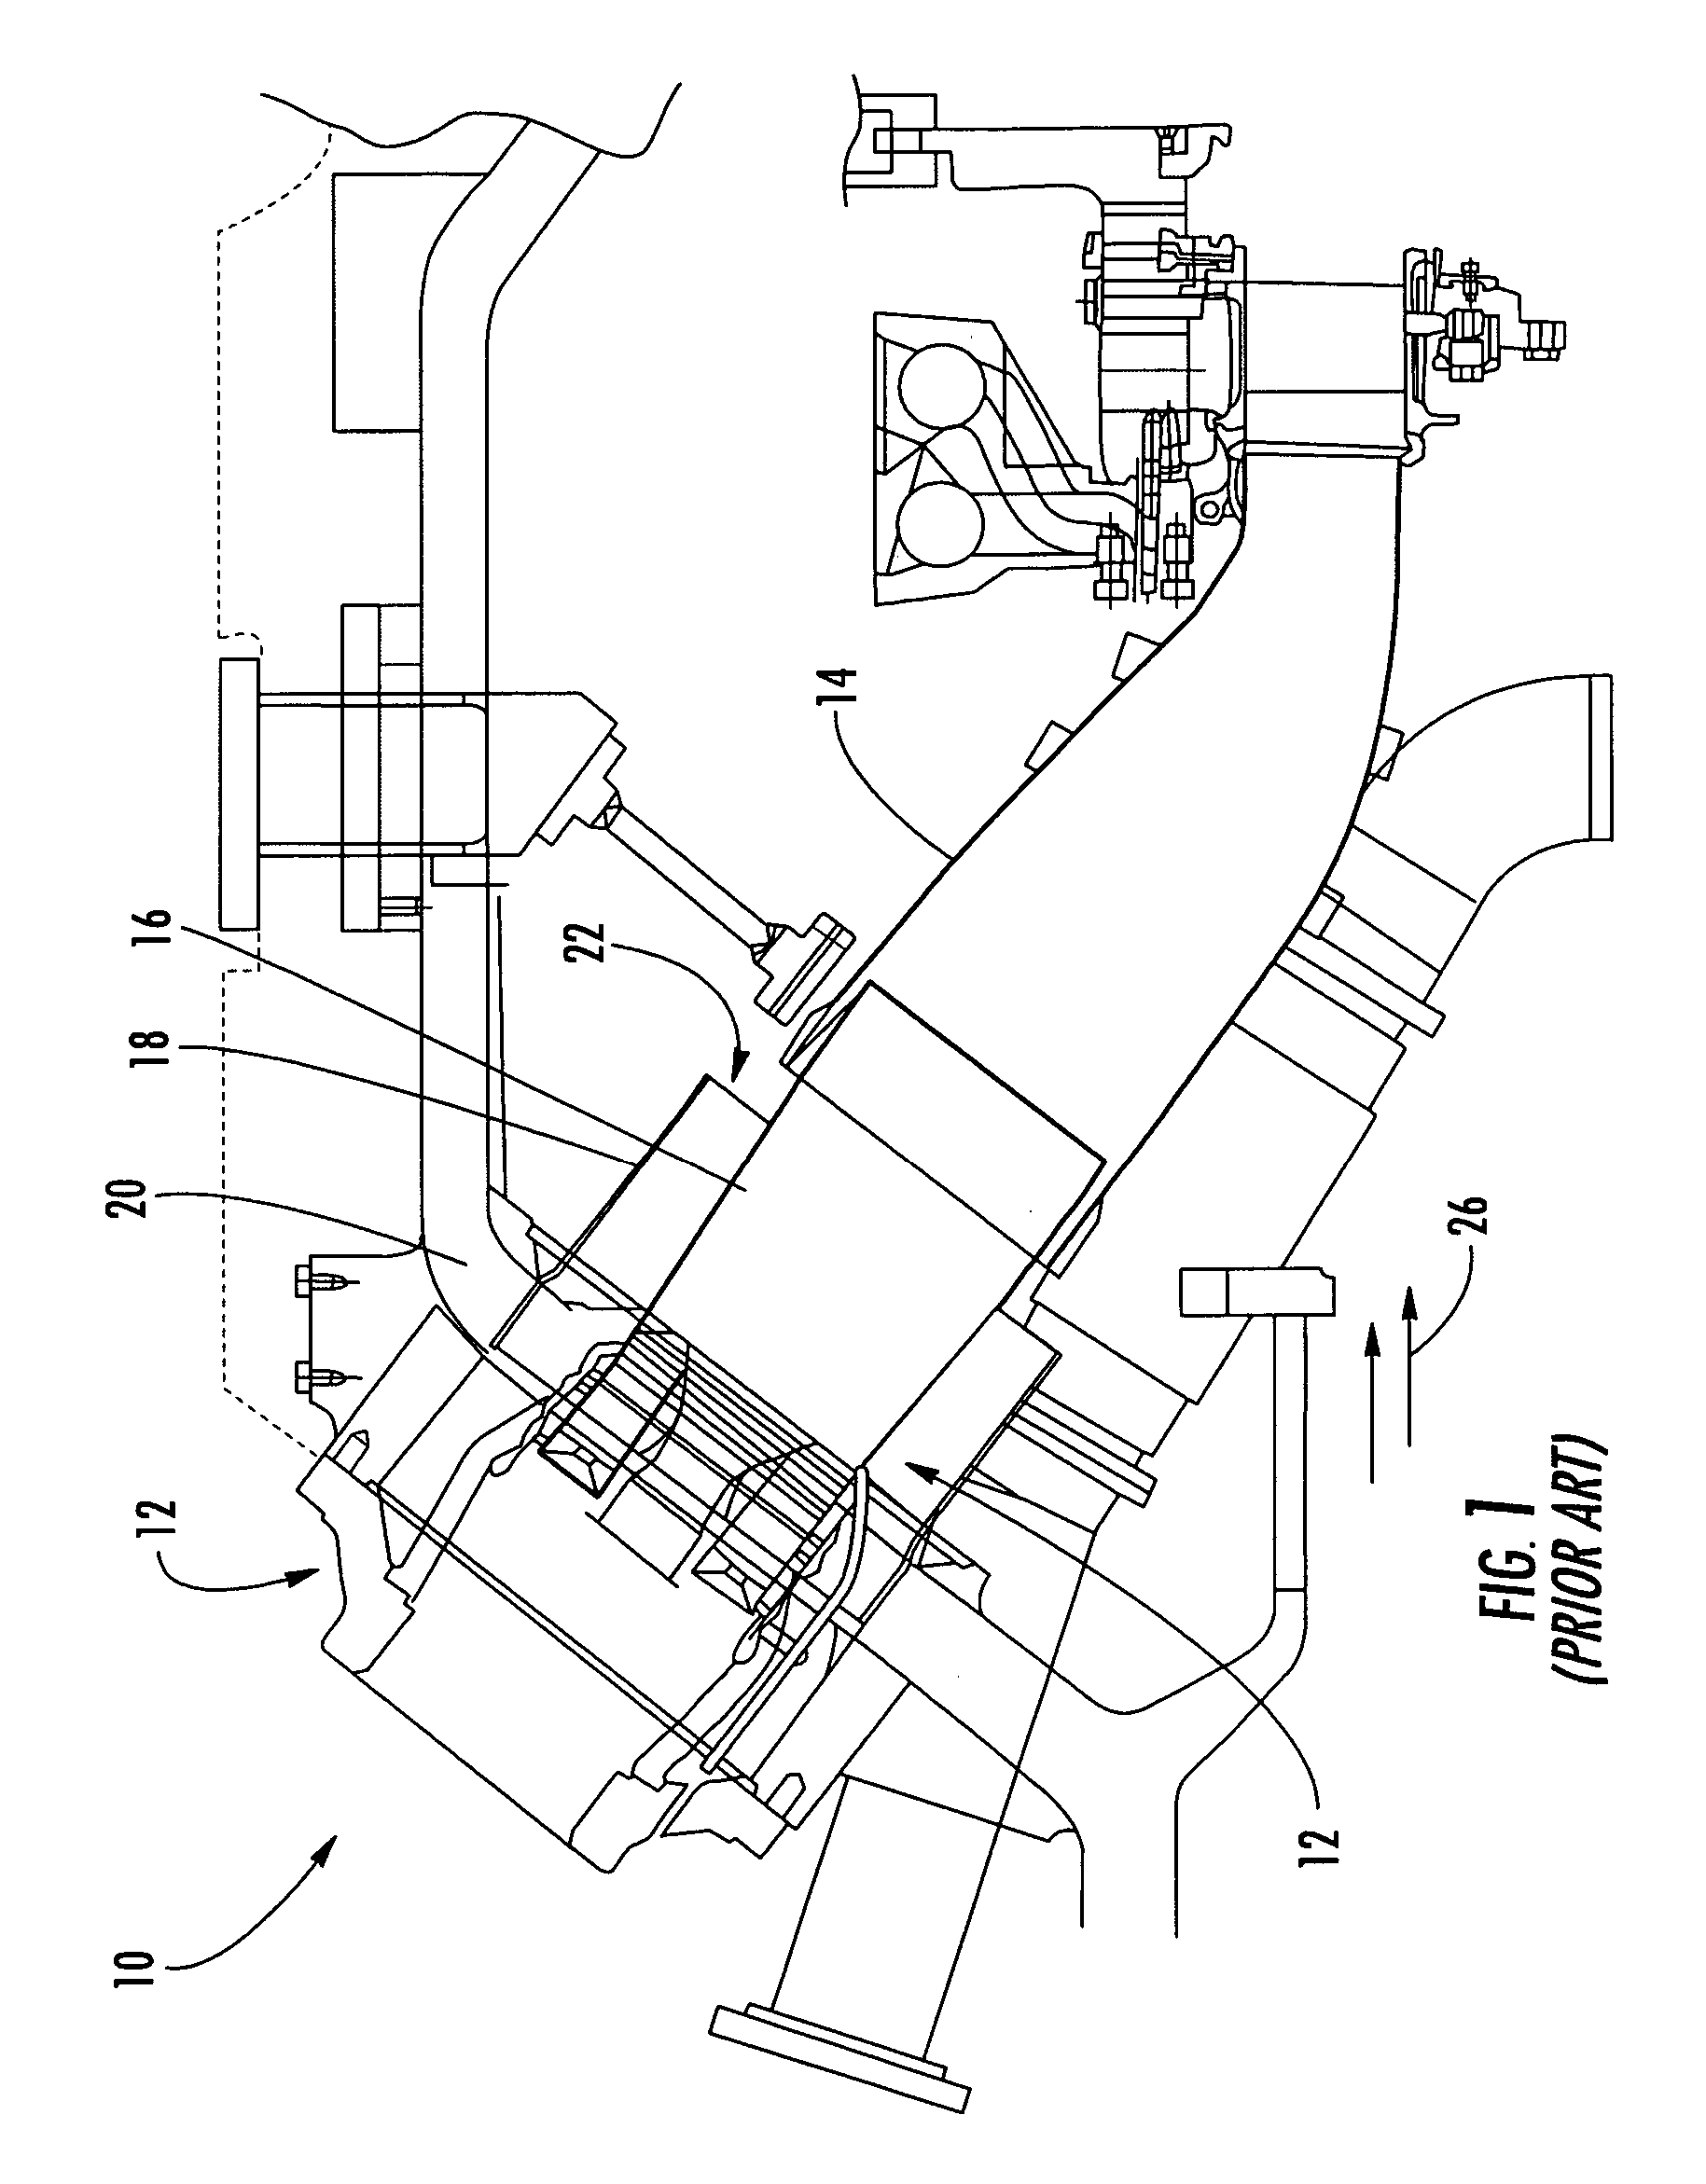 Combustor flow sleeve with optimized cooling and airflow distribution